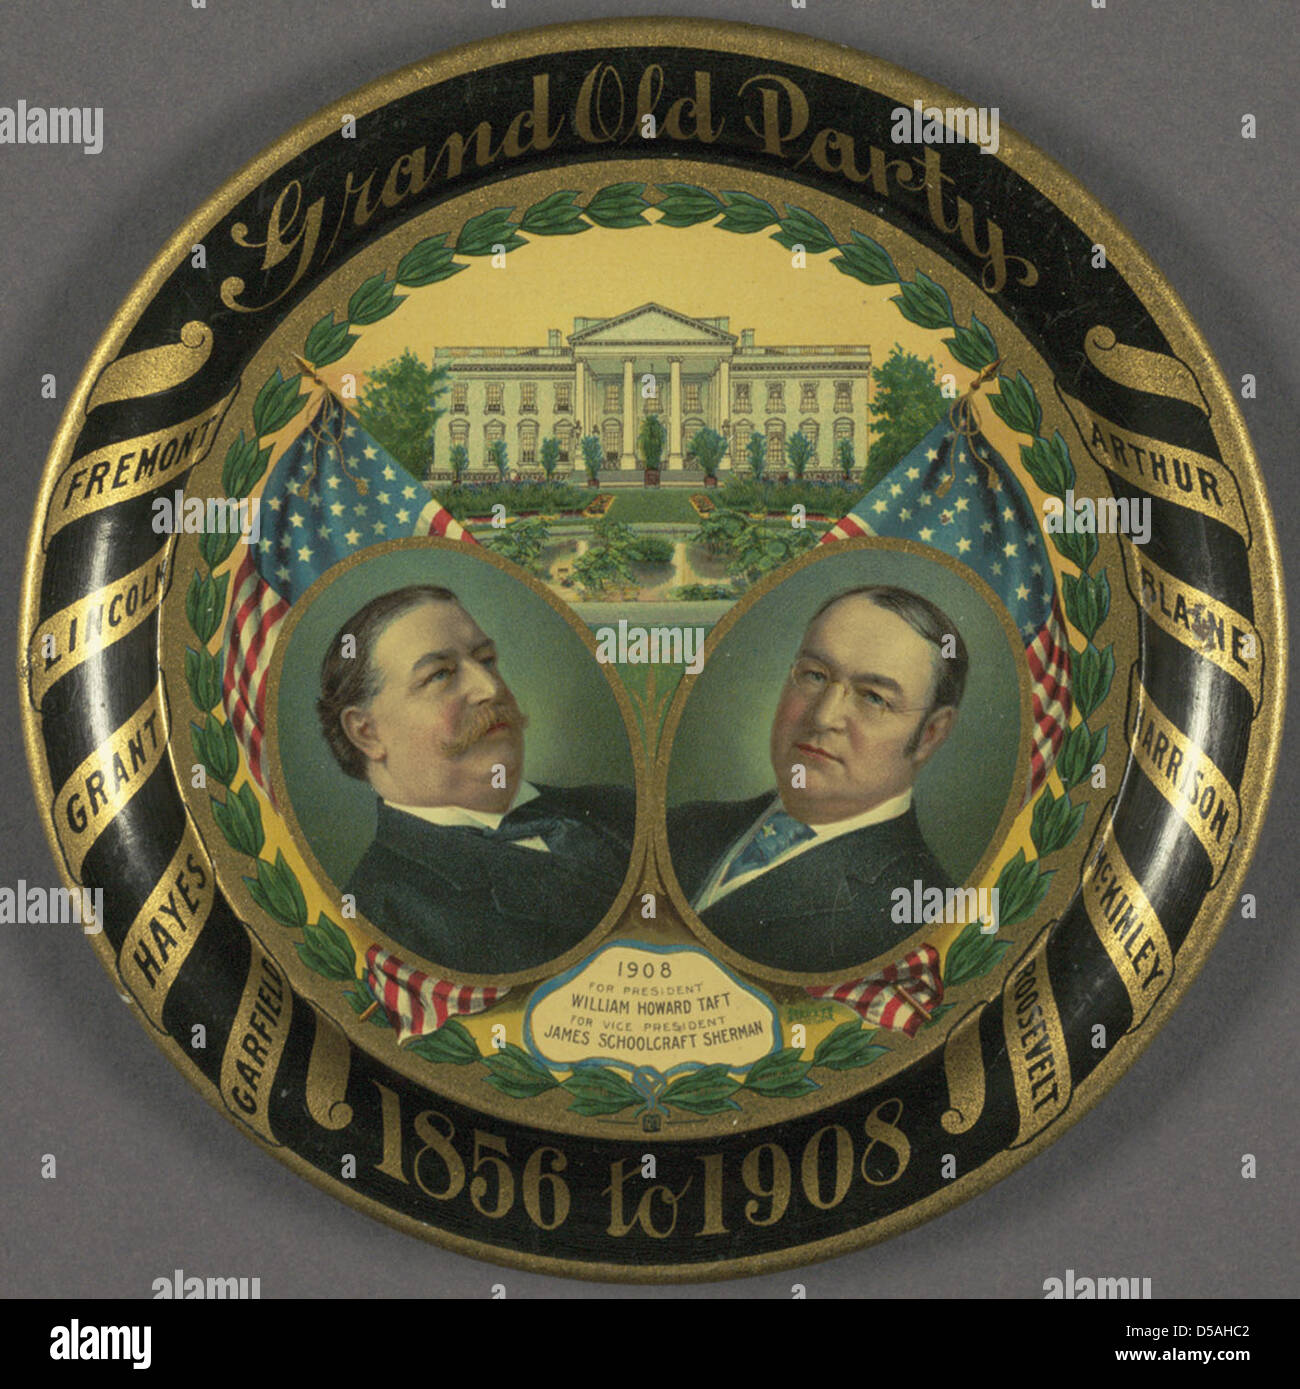 William H. Taft-Sherman 'Grand Old Party, 1856 to 1908' Tin Portrait Plate, 1908 Stock Photo